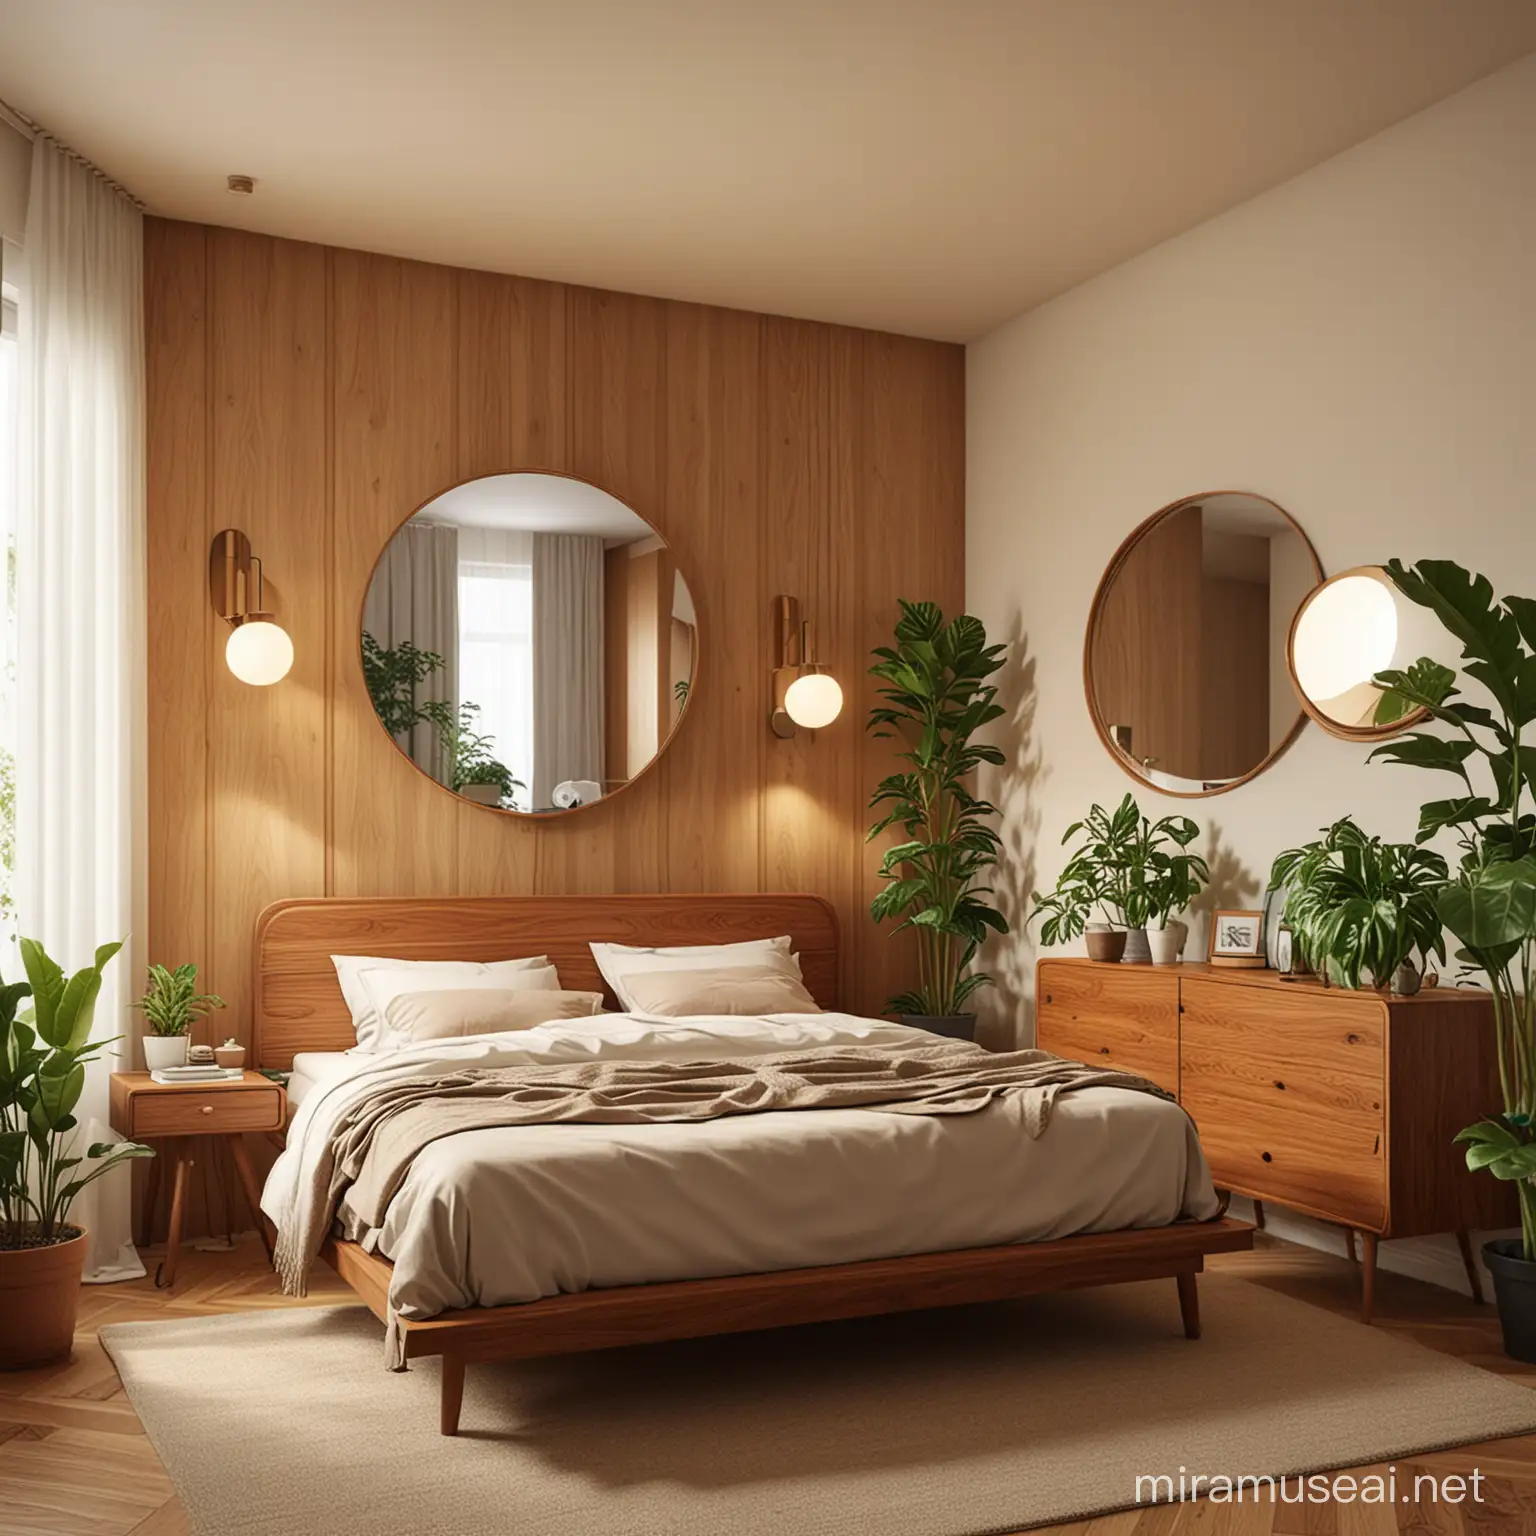 generates an image of a mid-century style bedroom, it should have a single window, plants, wooden panels, wooden bed, curved mirror, natural and artificial lighting, lamps and human scale
